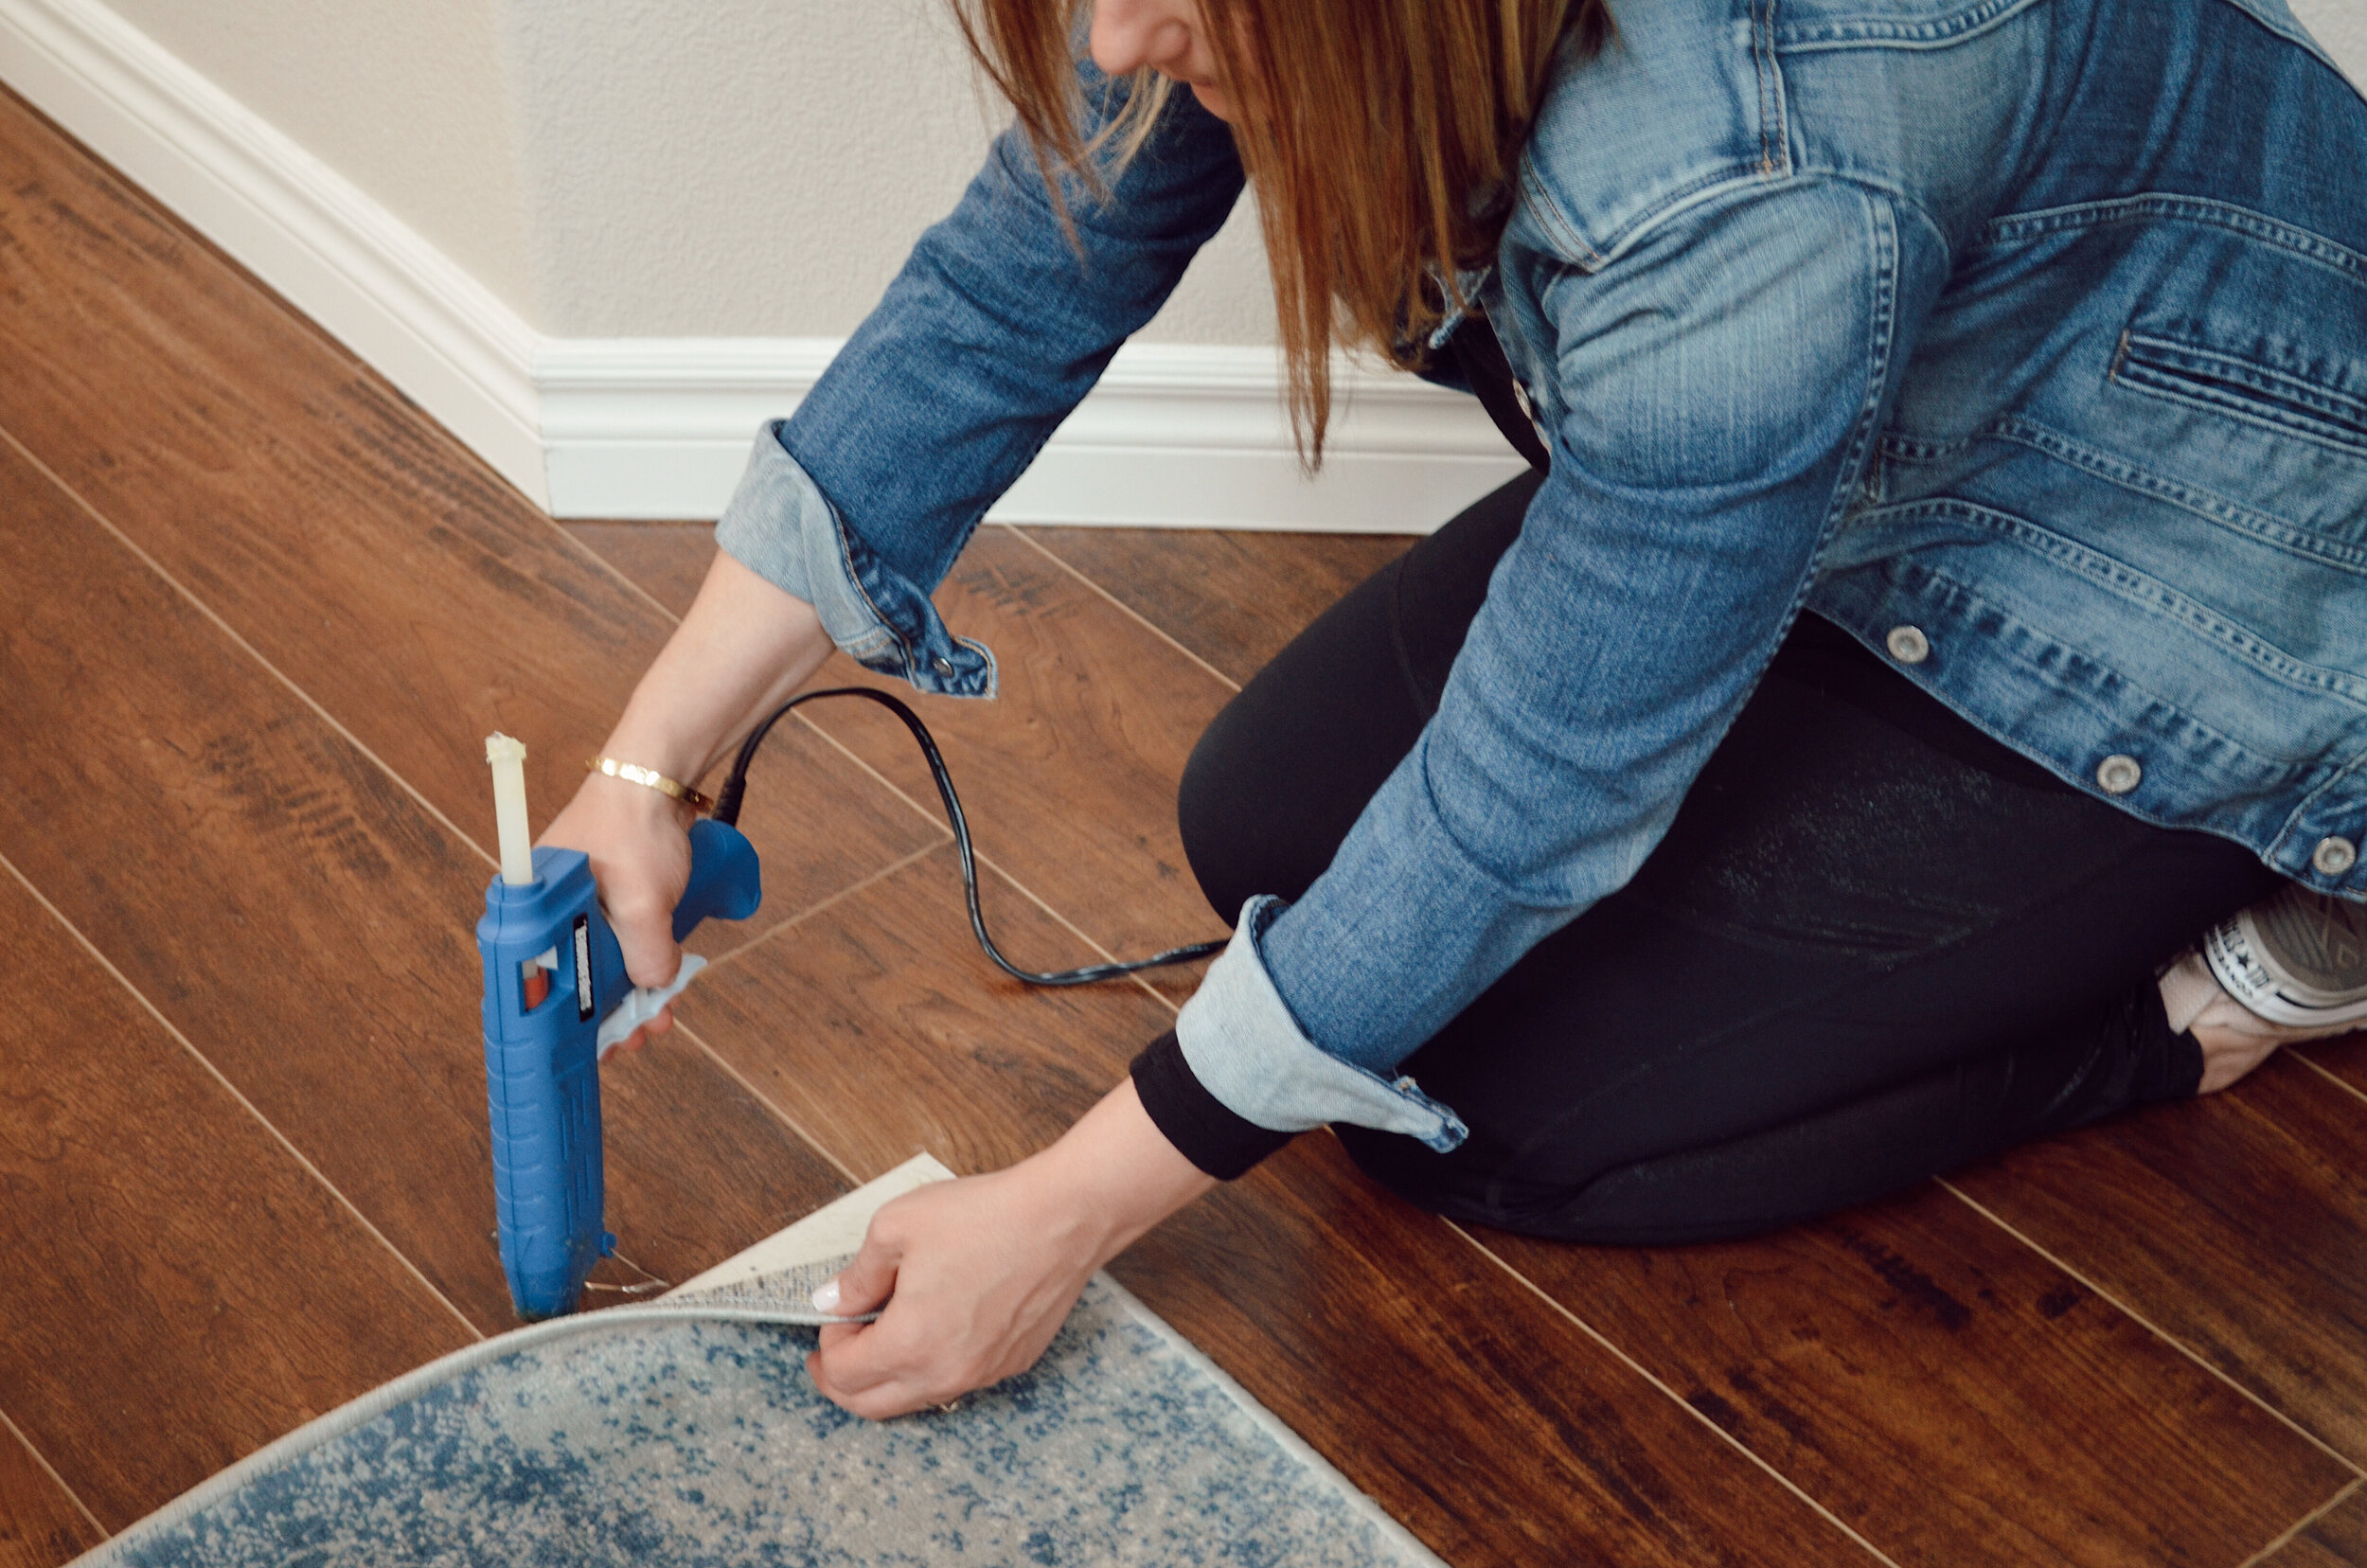 Is Your Area Rug Curling? Here's How To Flatten It - RugPadUSA